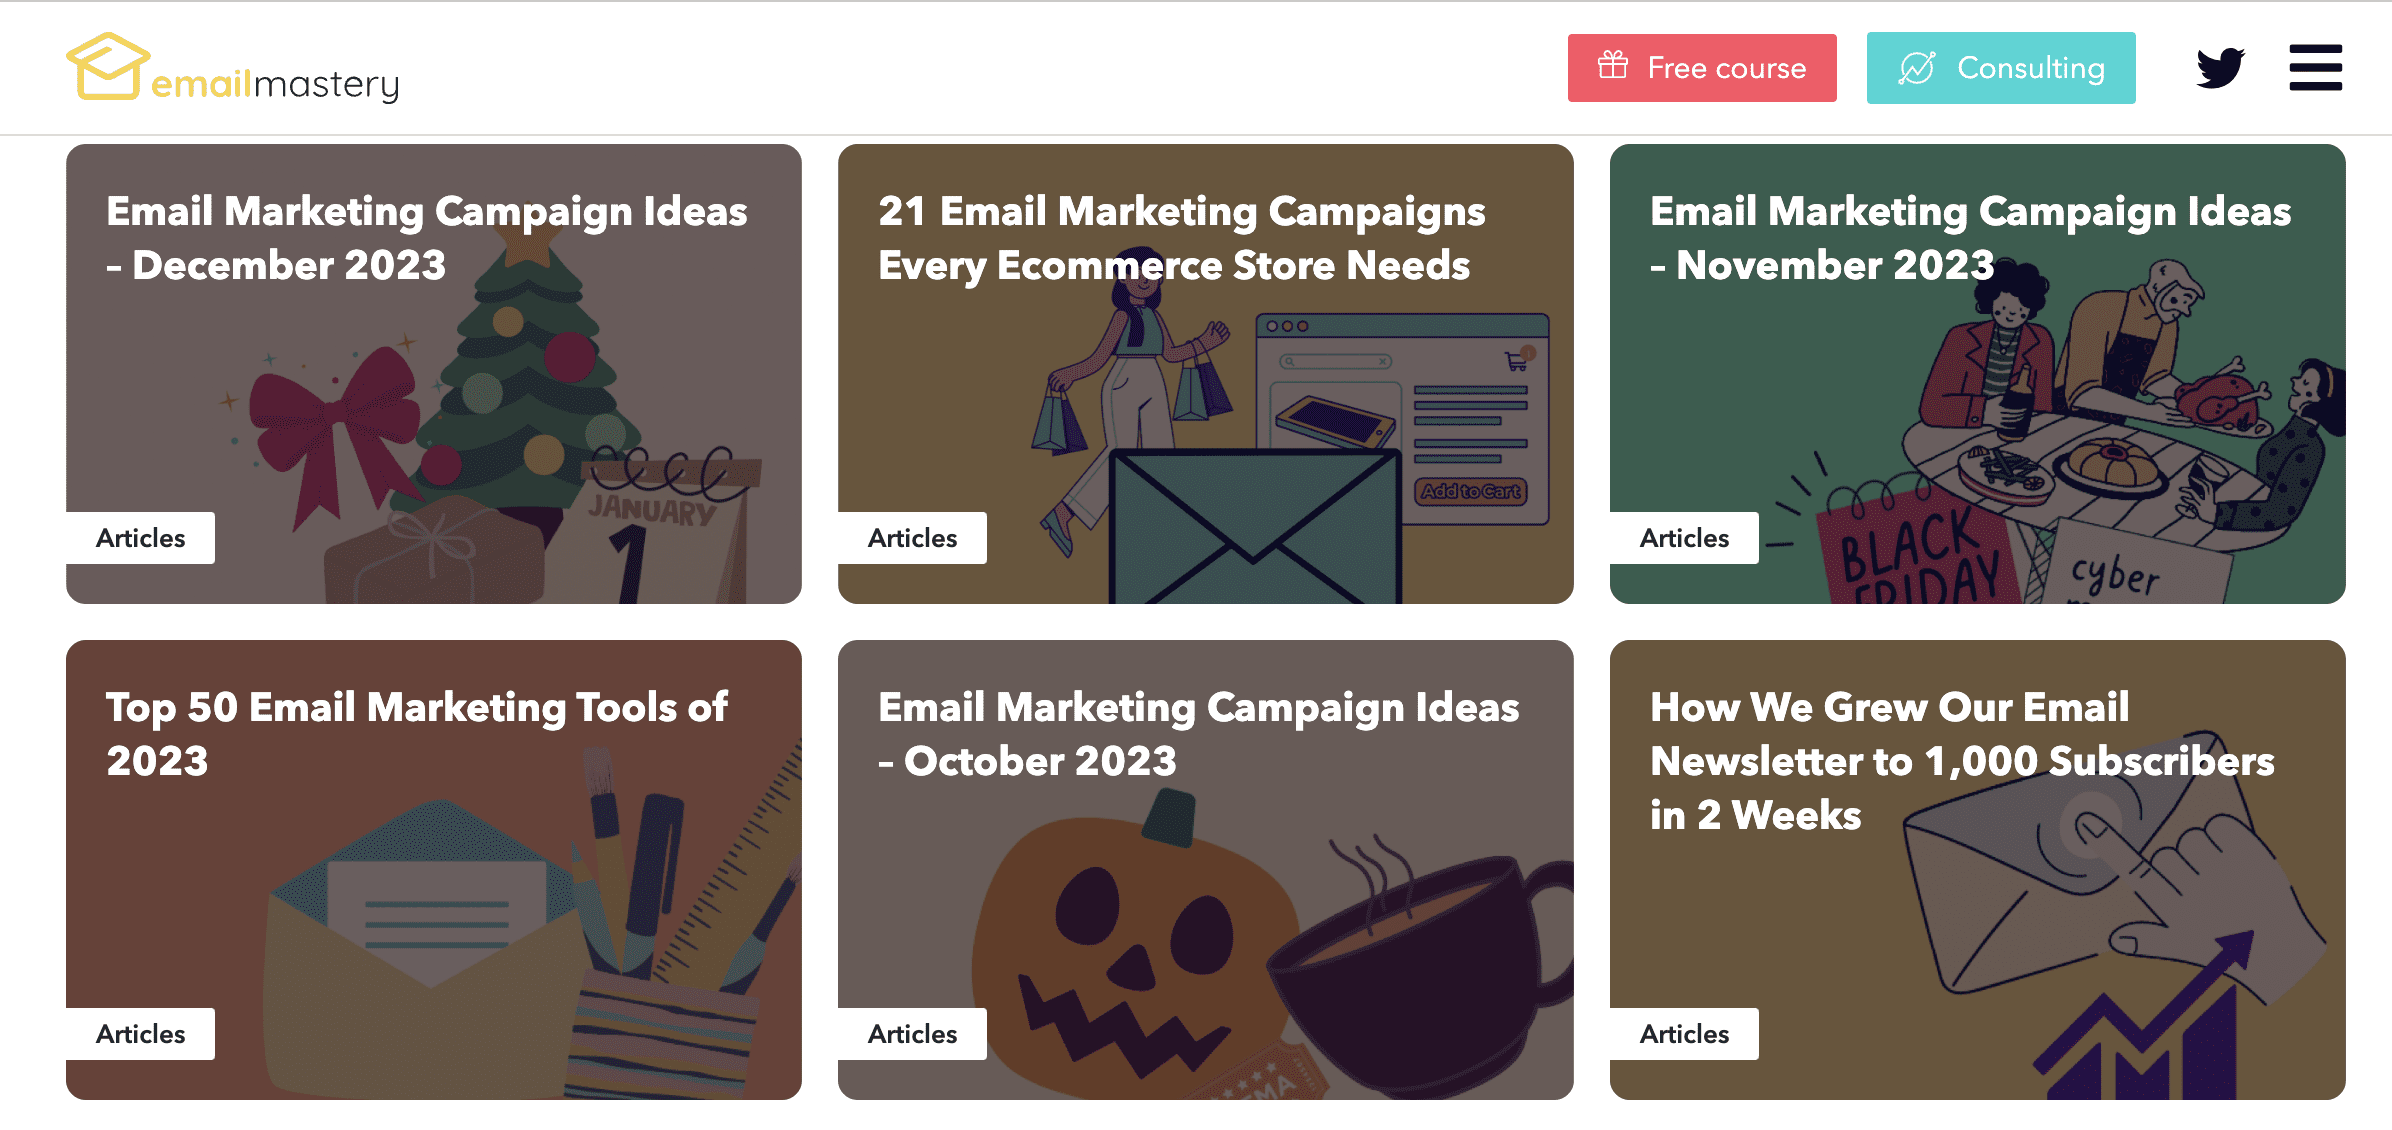 Social media and e-mail marketing blog _ Choose an idea for an email marketing campaign